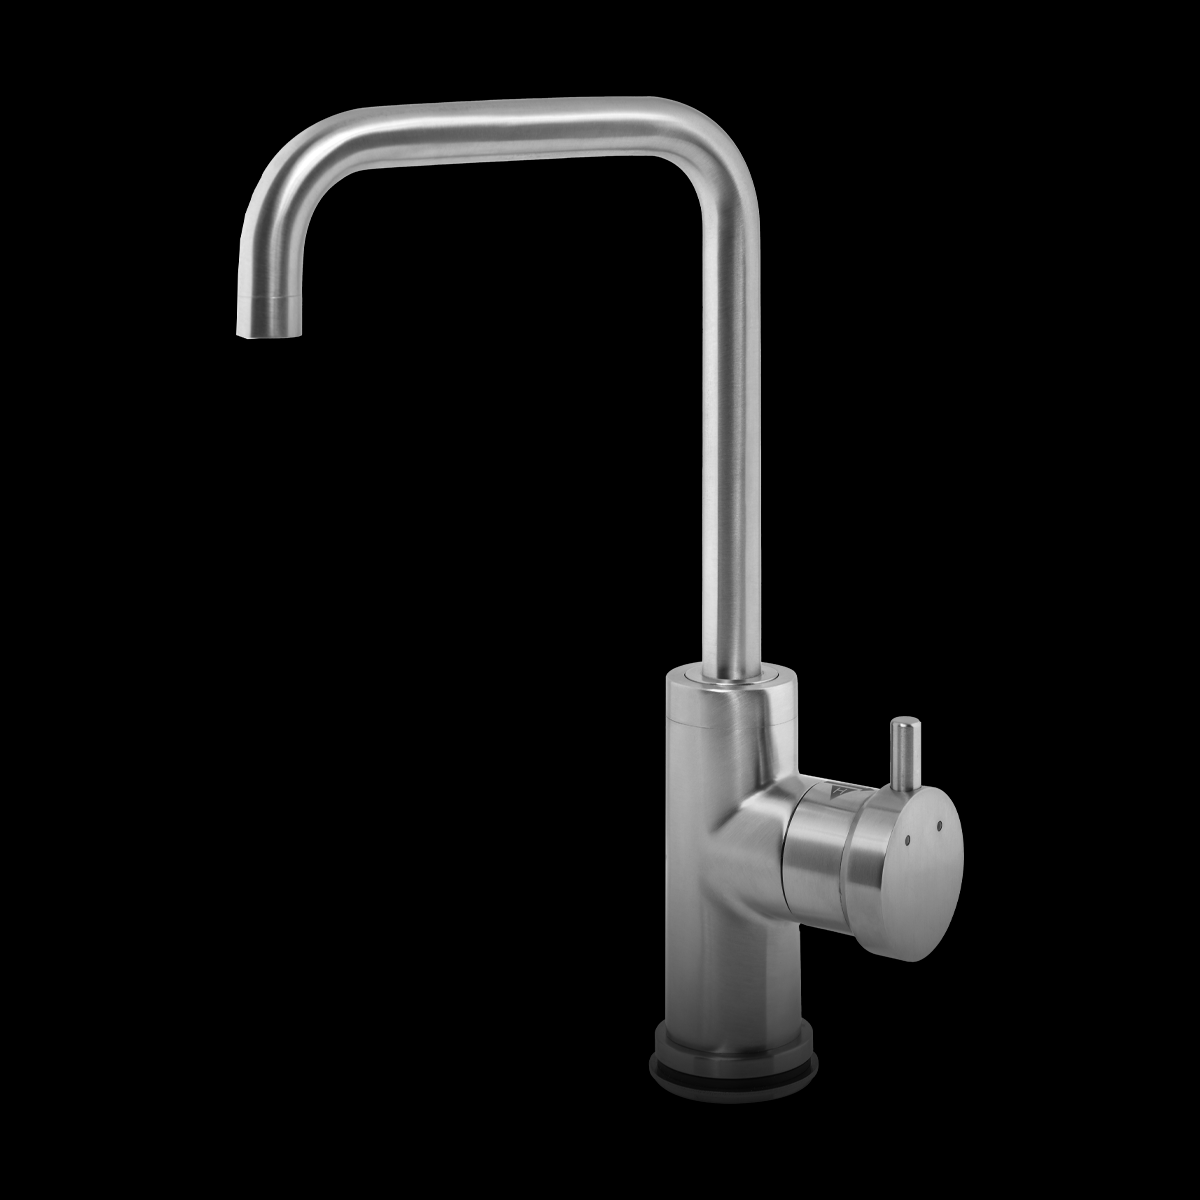 Boiling Water Tap Aquarius by Monarch Water.